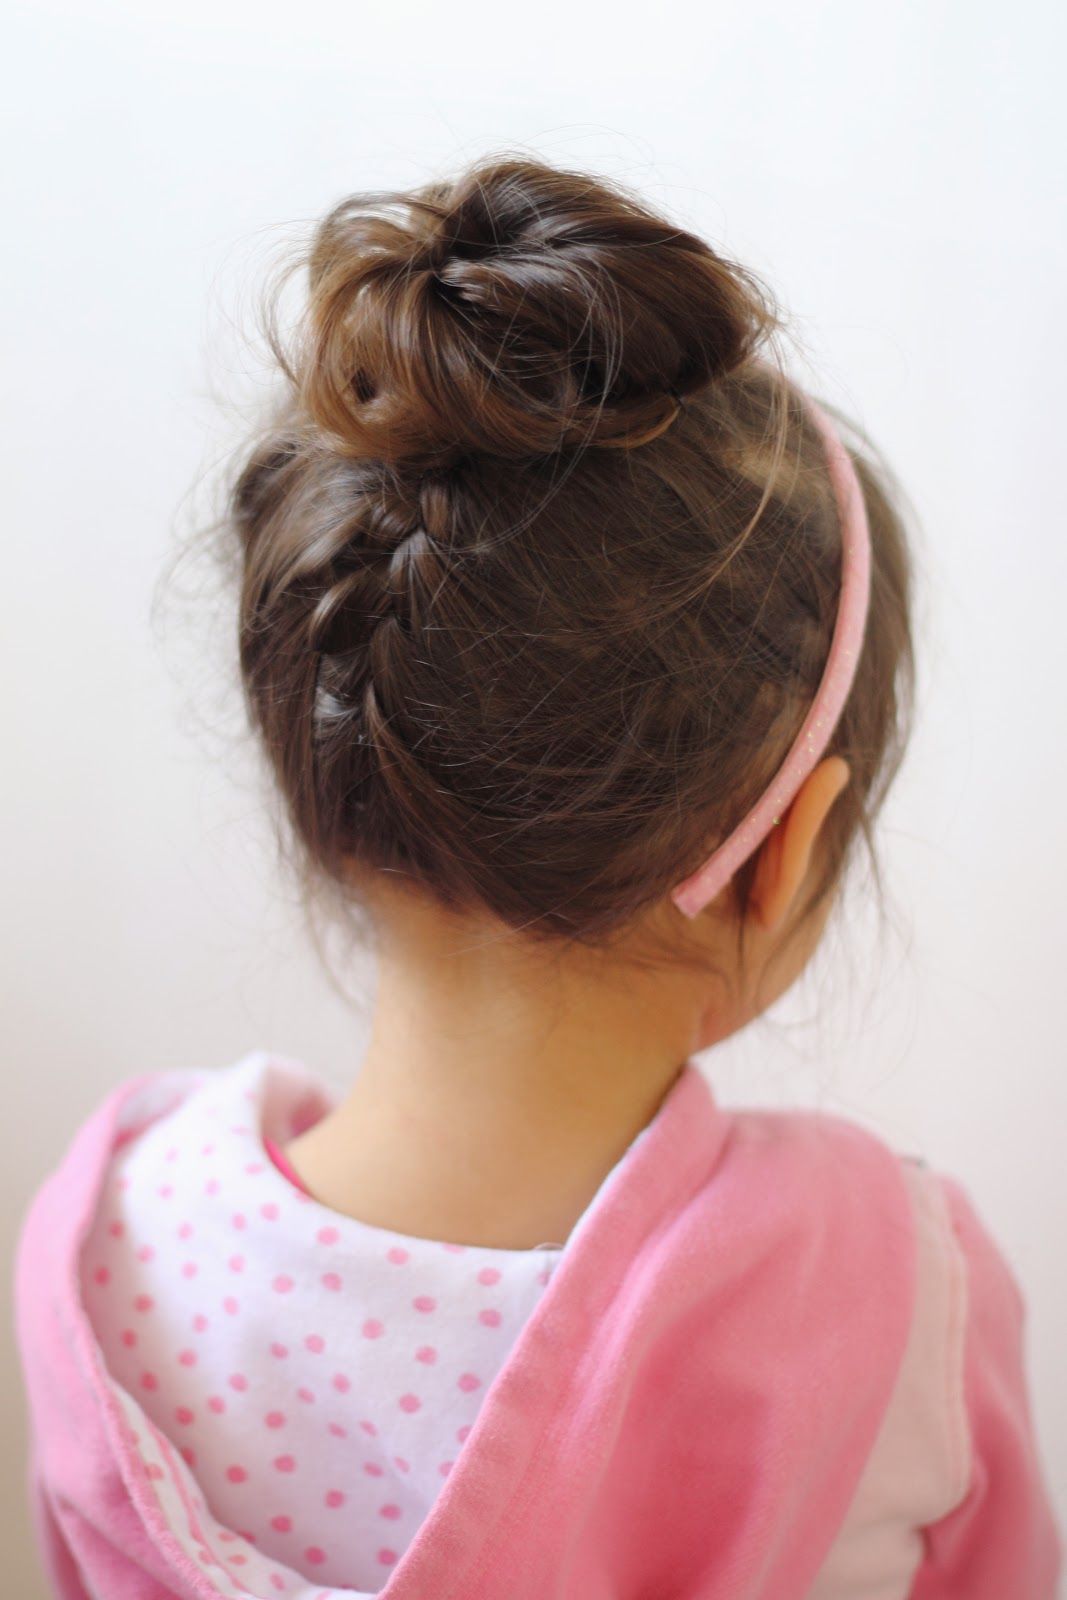 16 Toddler hair styles to mix up the pony tail and simple braids.  dutch braids, french braid, side pony tail, braided pony, messy